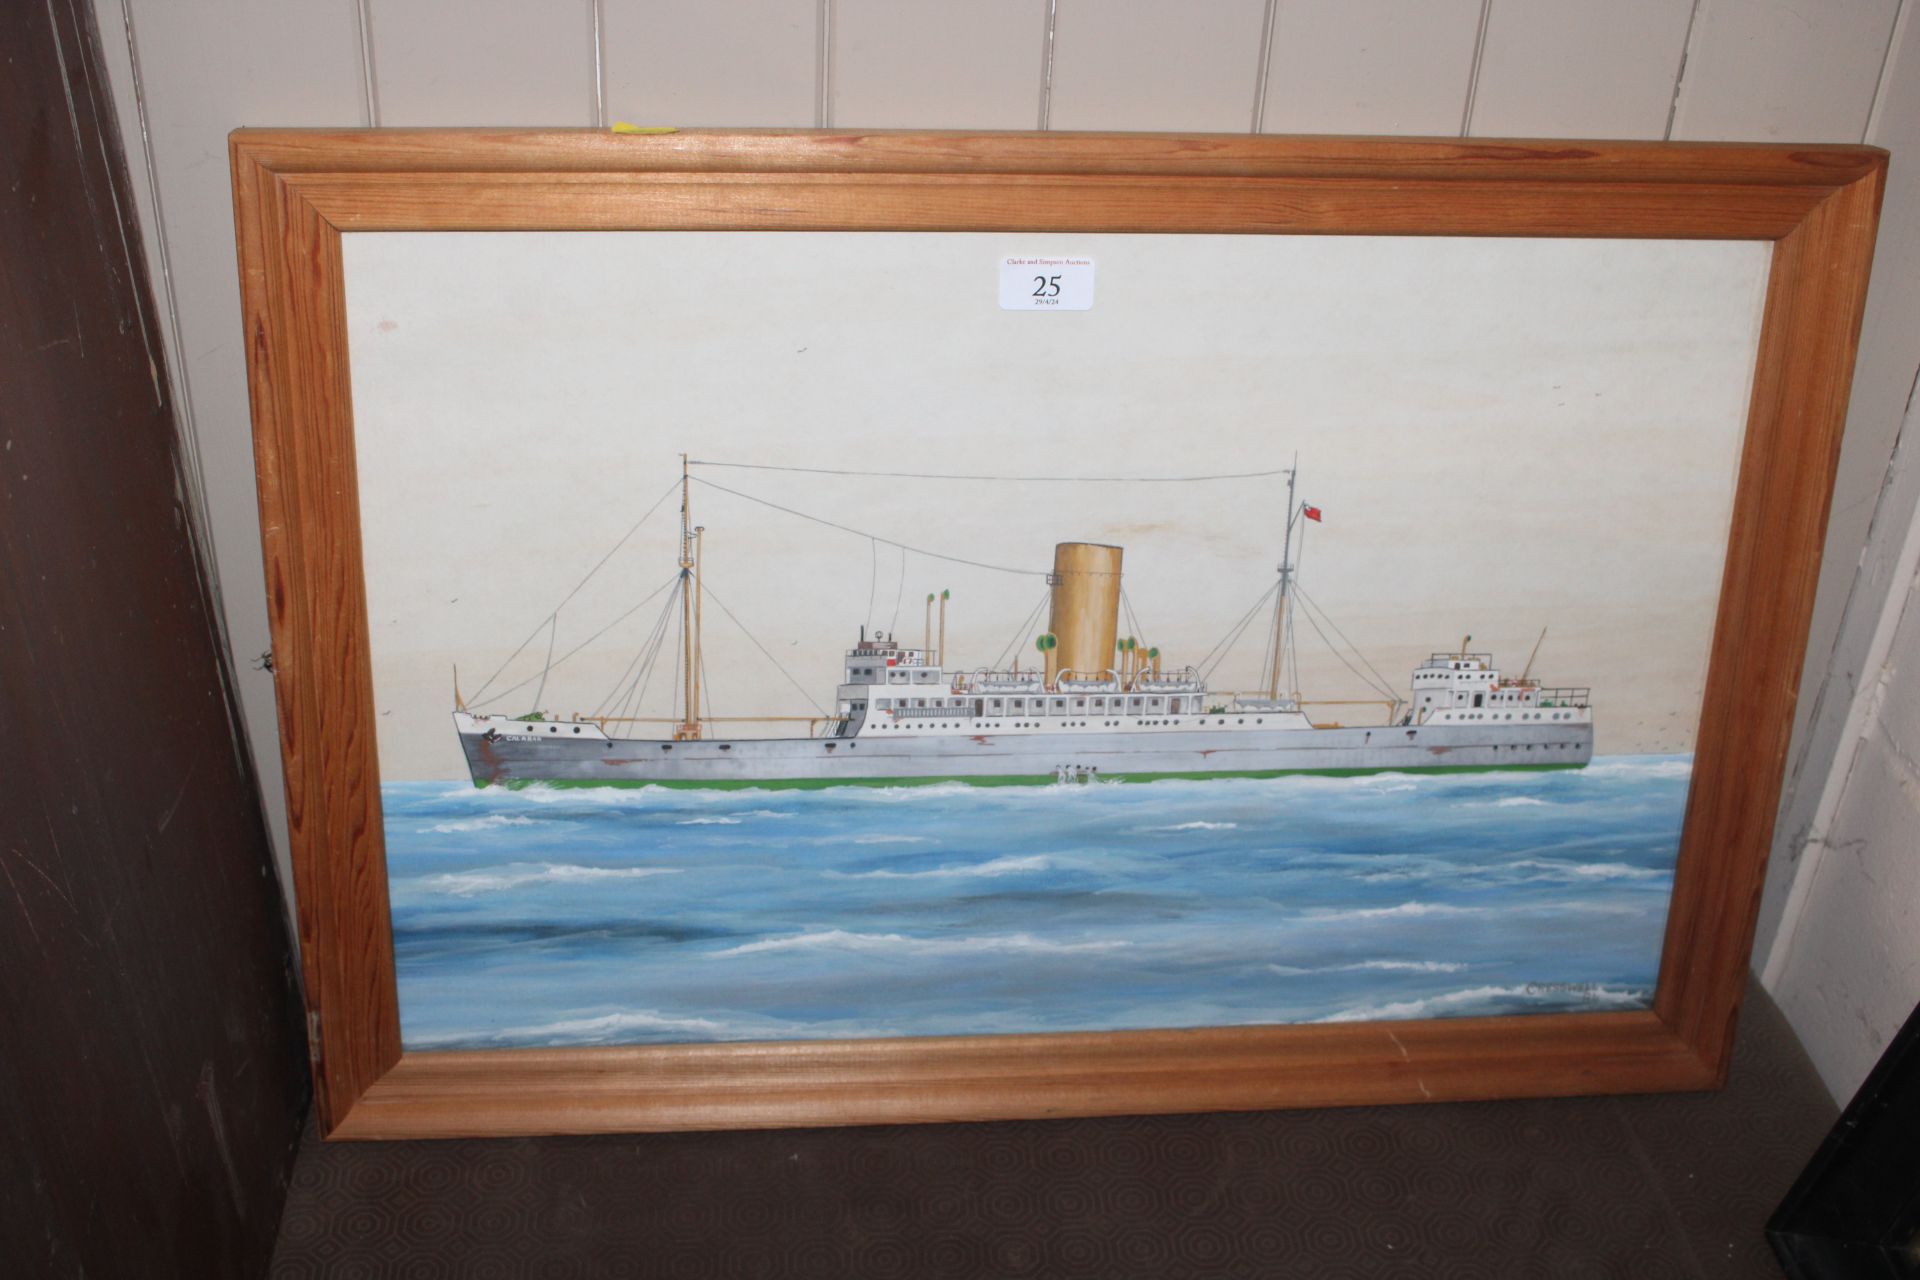 Cresswell, gouache study of the steam ship "Calaba